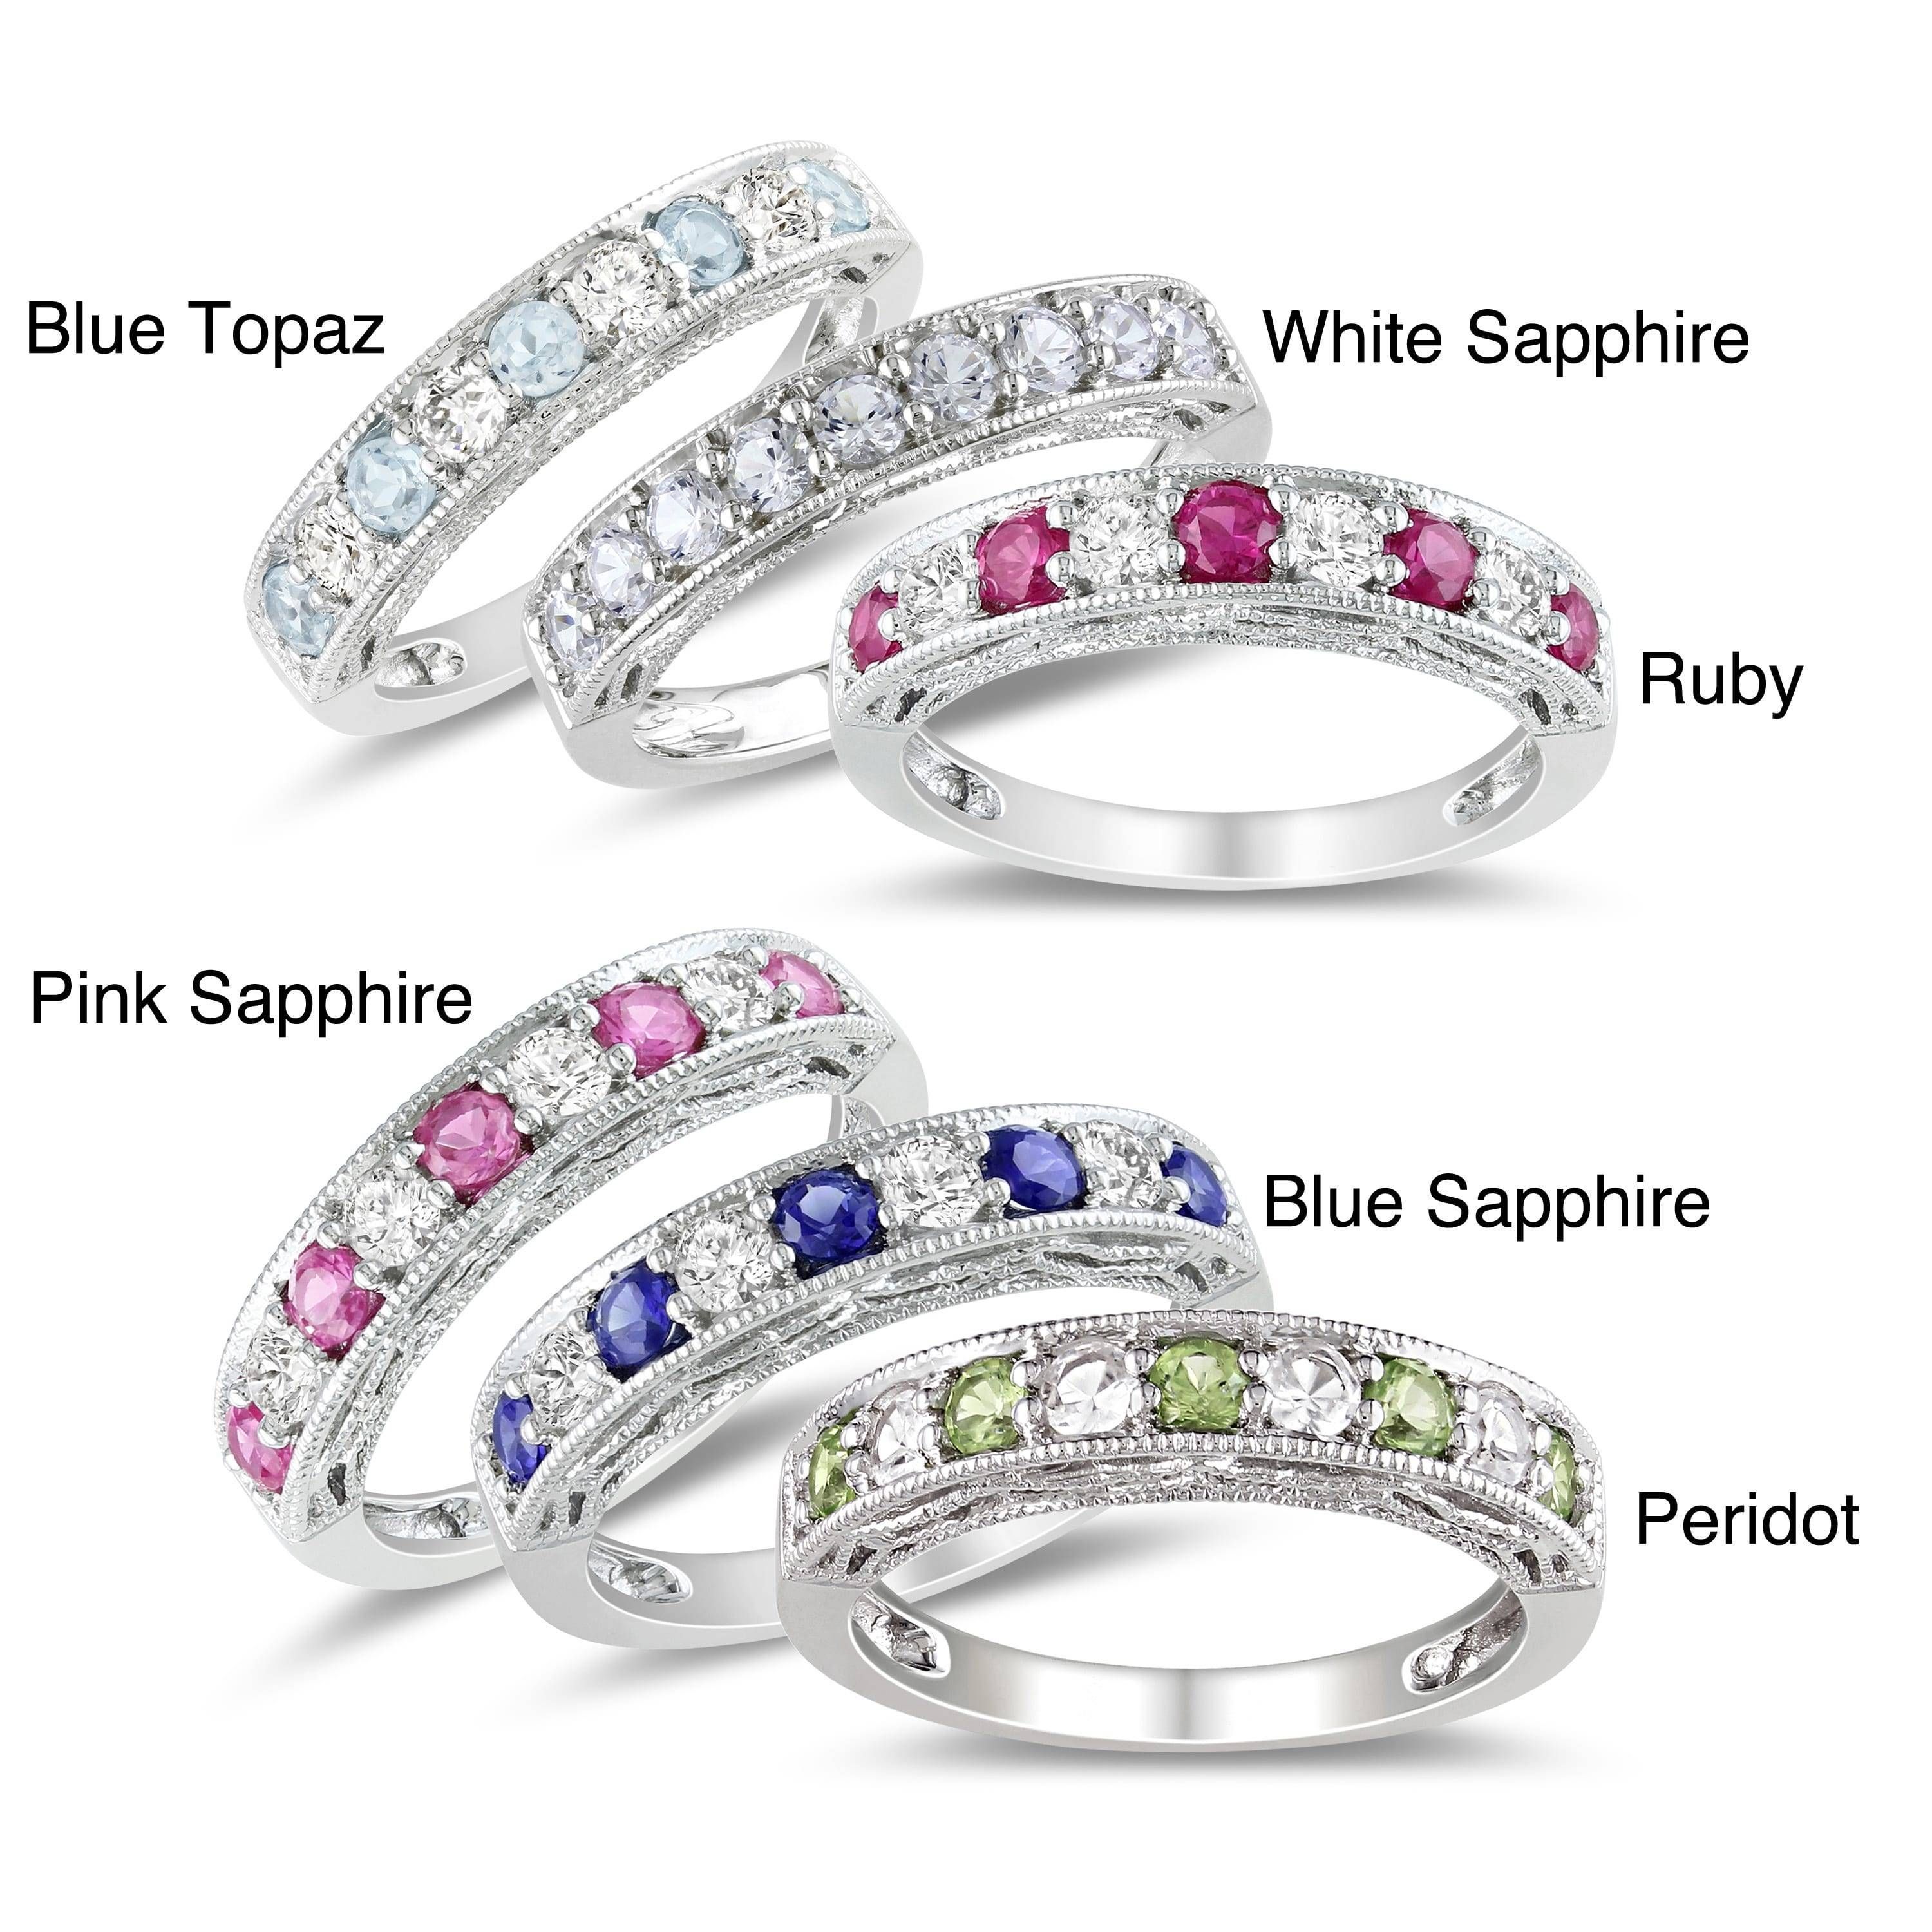 Miadora Sterling Silver White Sapphire And Gemstone Stackable Regarding Most Up To Date White Sapphire Anniversary Rings (View 13 of 25)